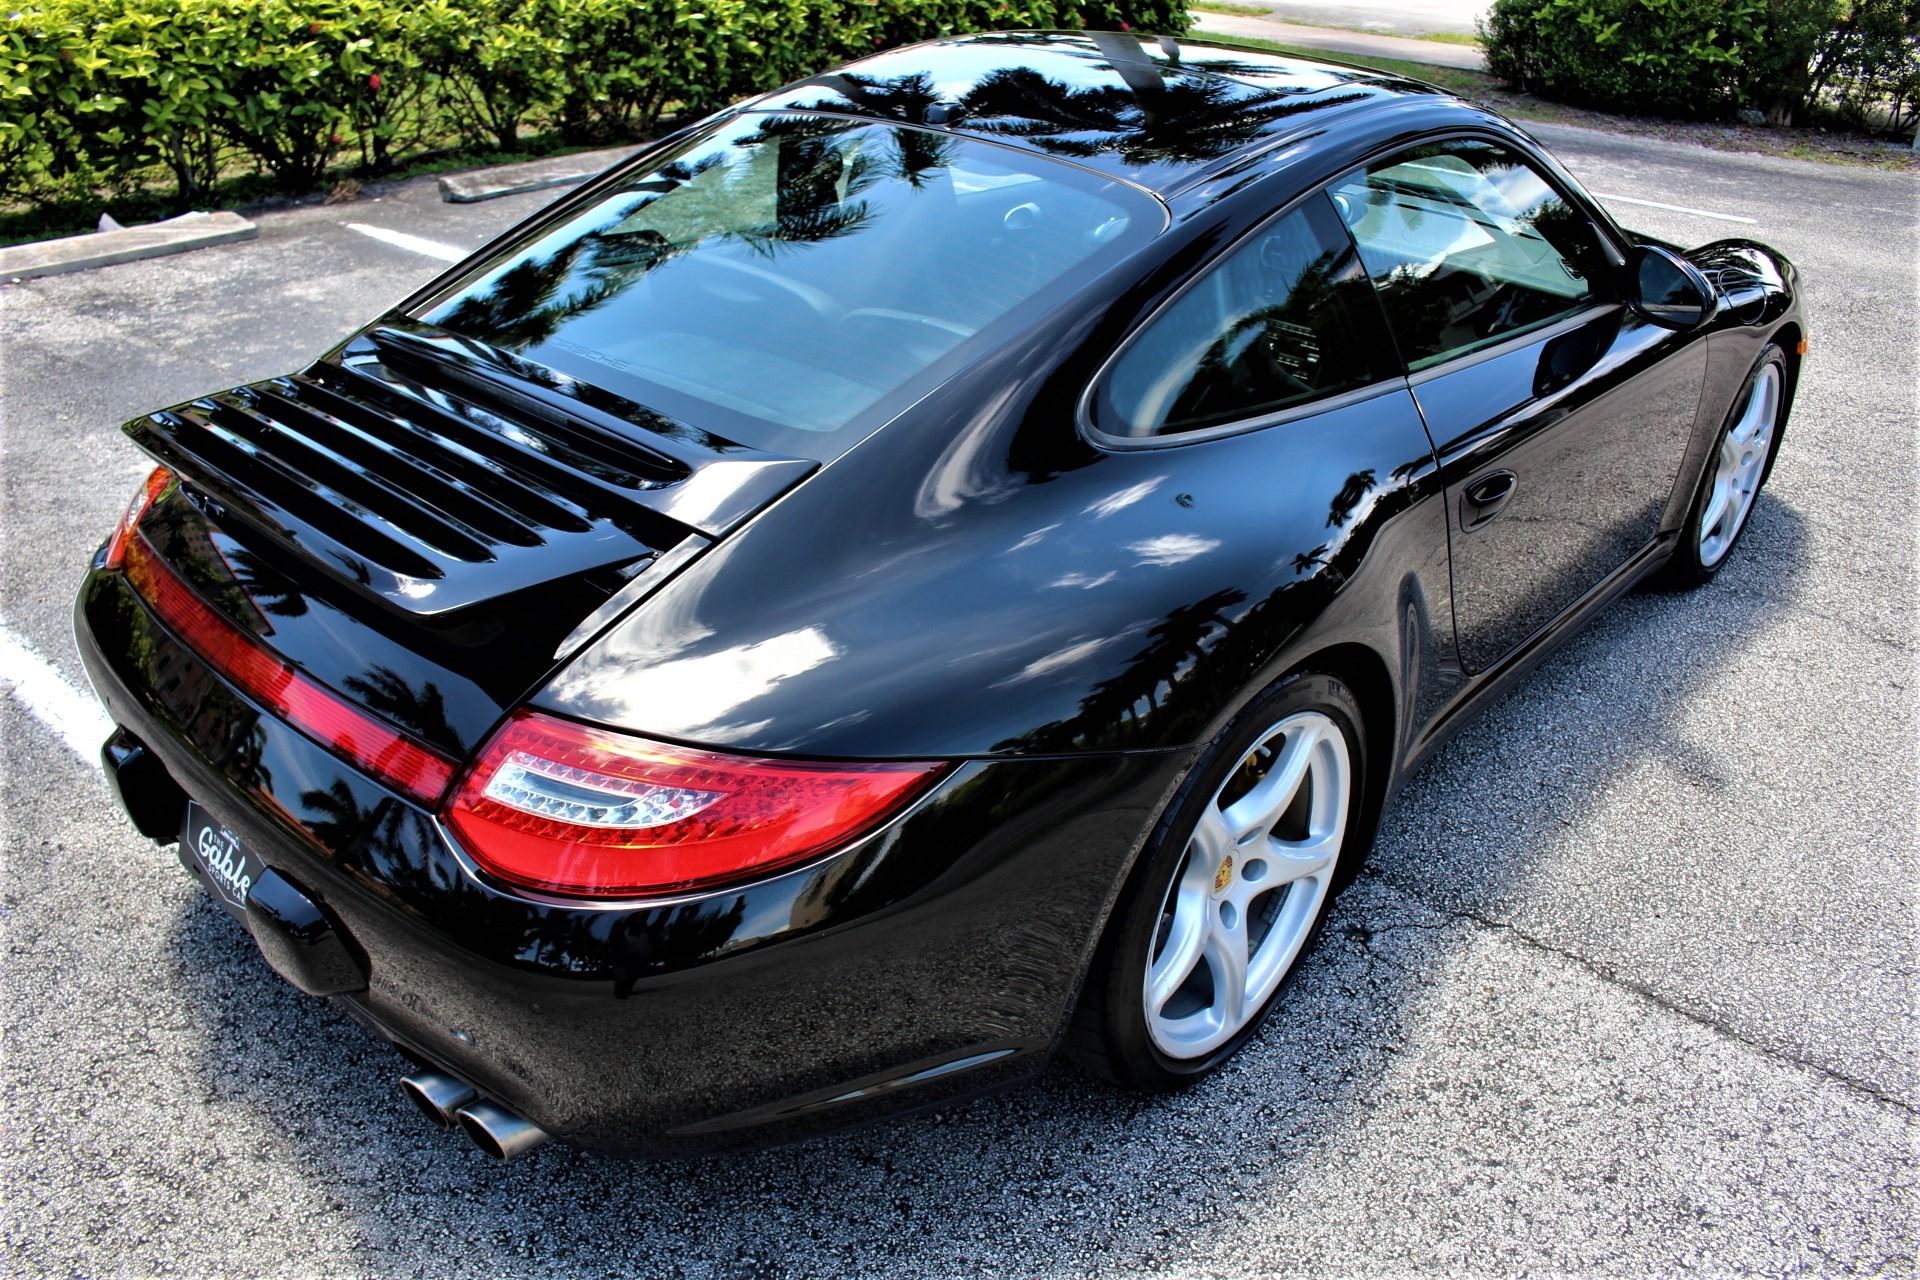 Used 2009 Porsche 911 Carrera 4S for sale Sold at The Gables Sports Cars in Miami FL 33146 2